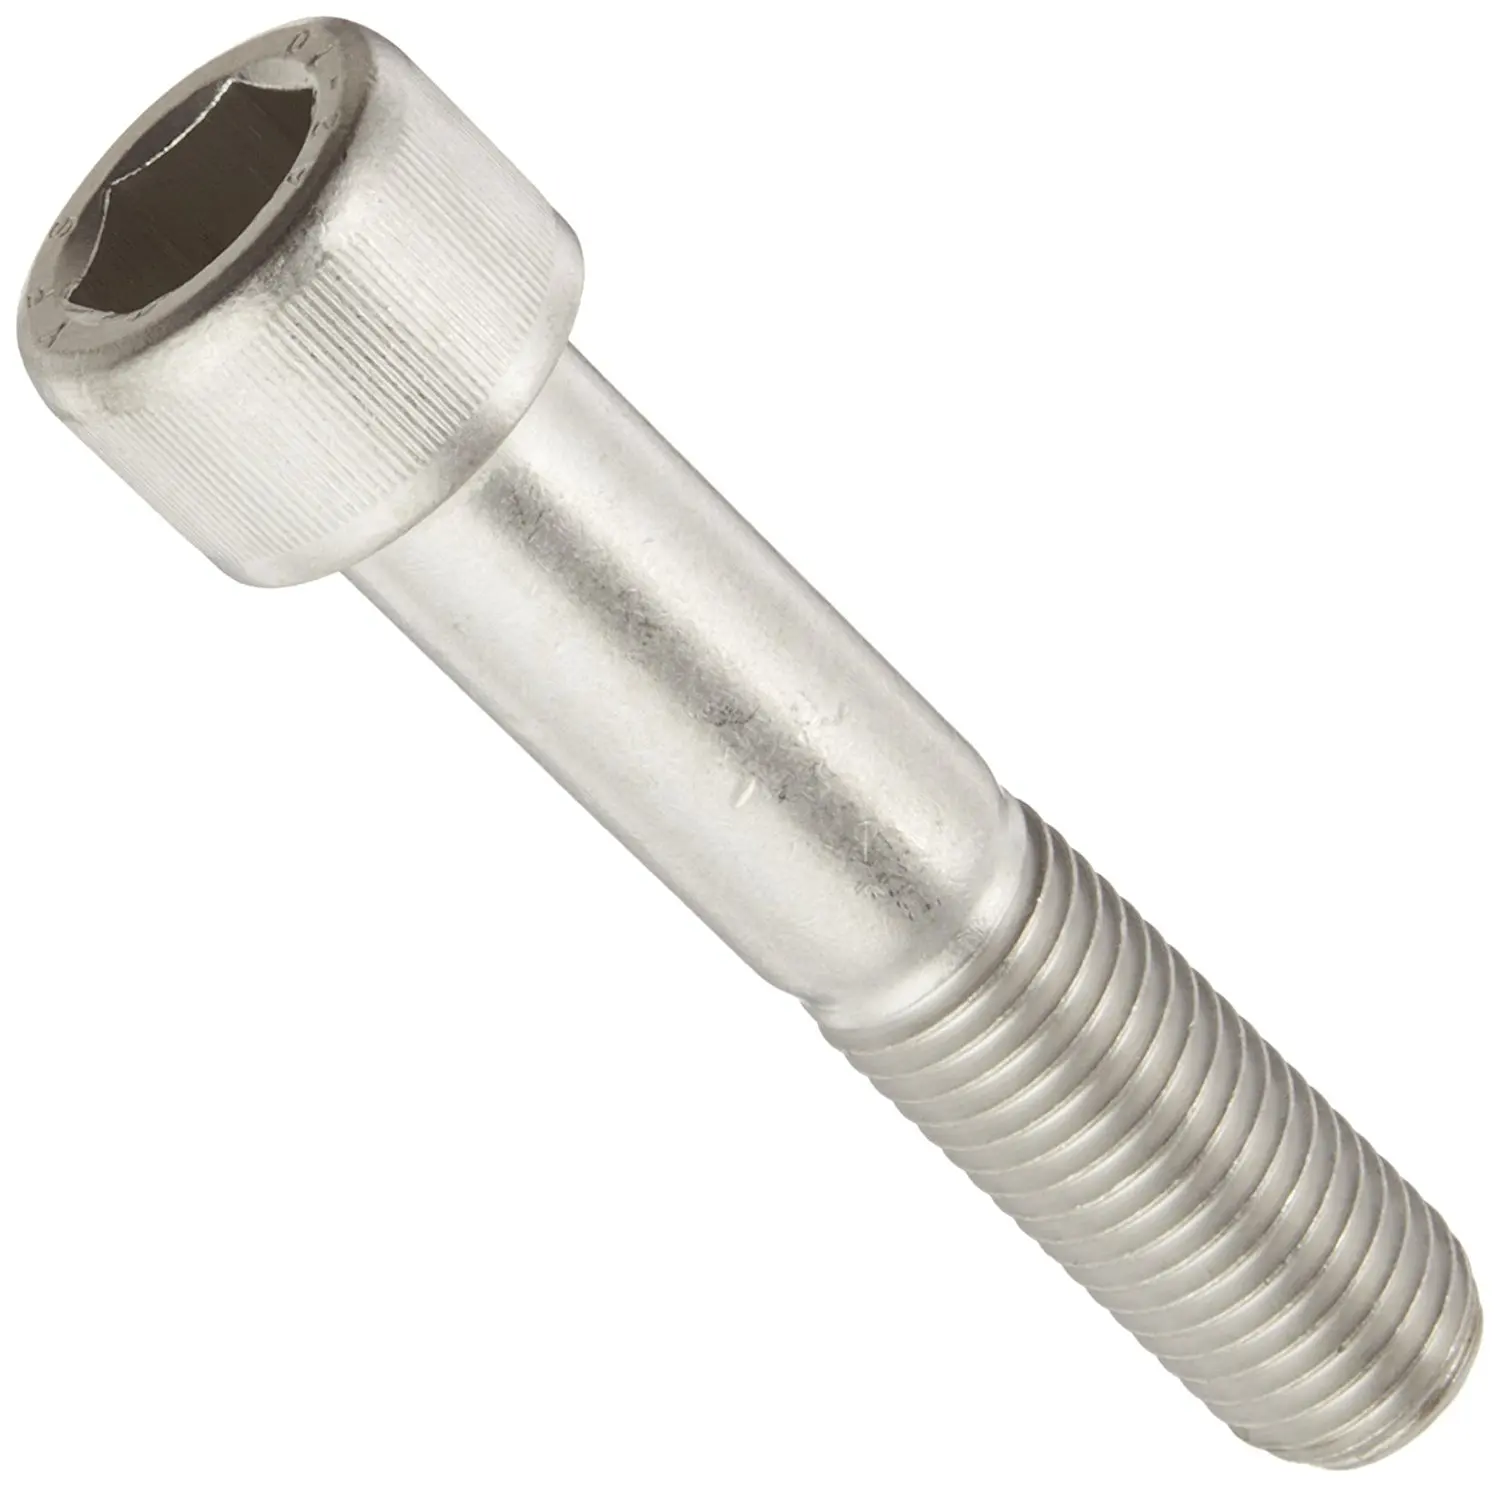 Knurled Cup Point M4-0.7 Metric Coarse Threads 10mm Length Meets ISO 4029 Hex Socket Drive Pack of 100 Plain Finish Alloy Steel Set Screw